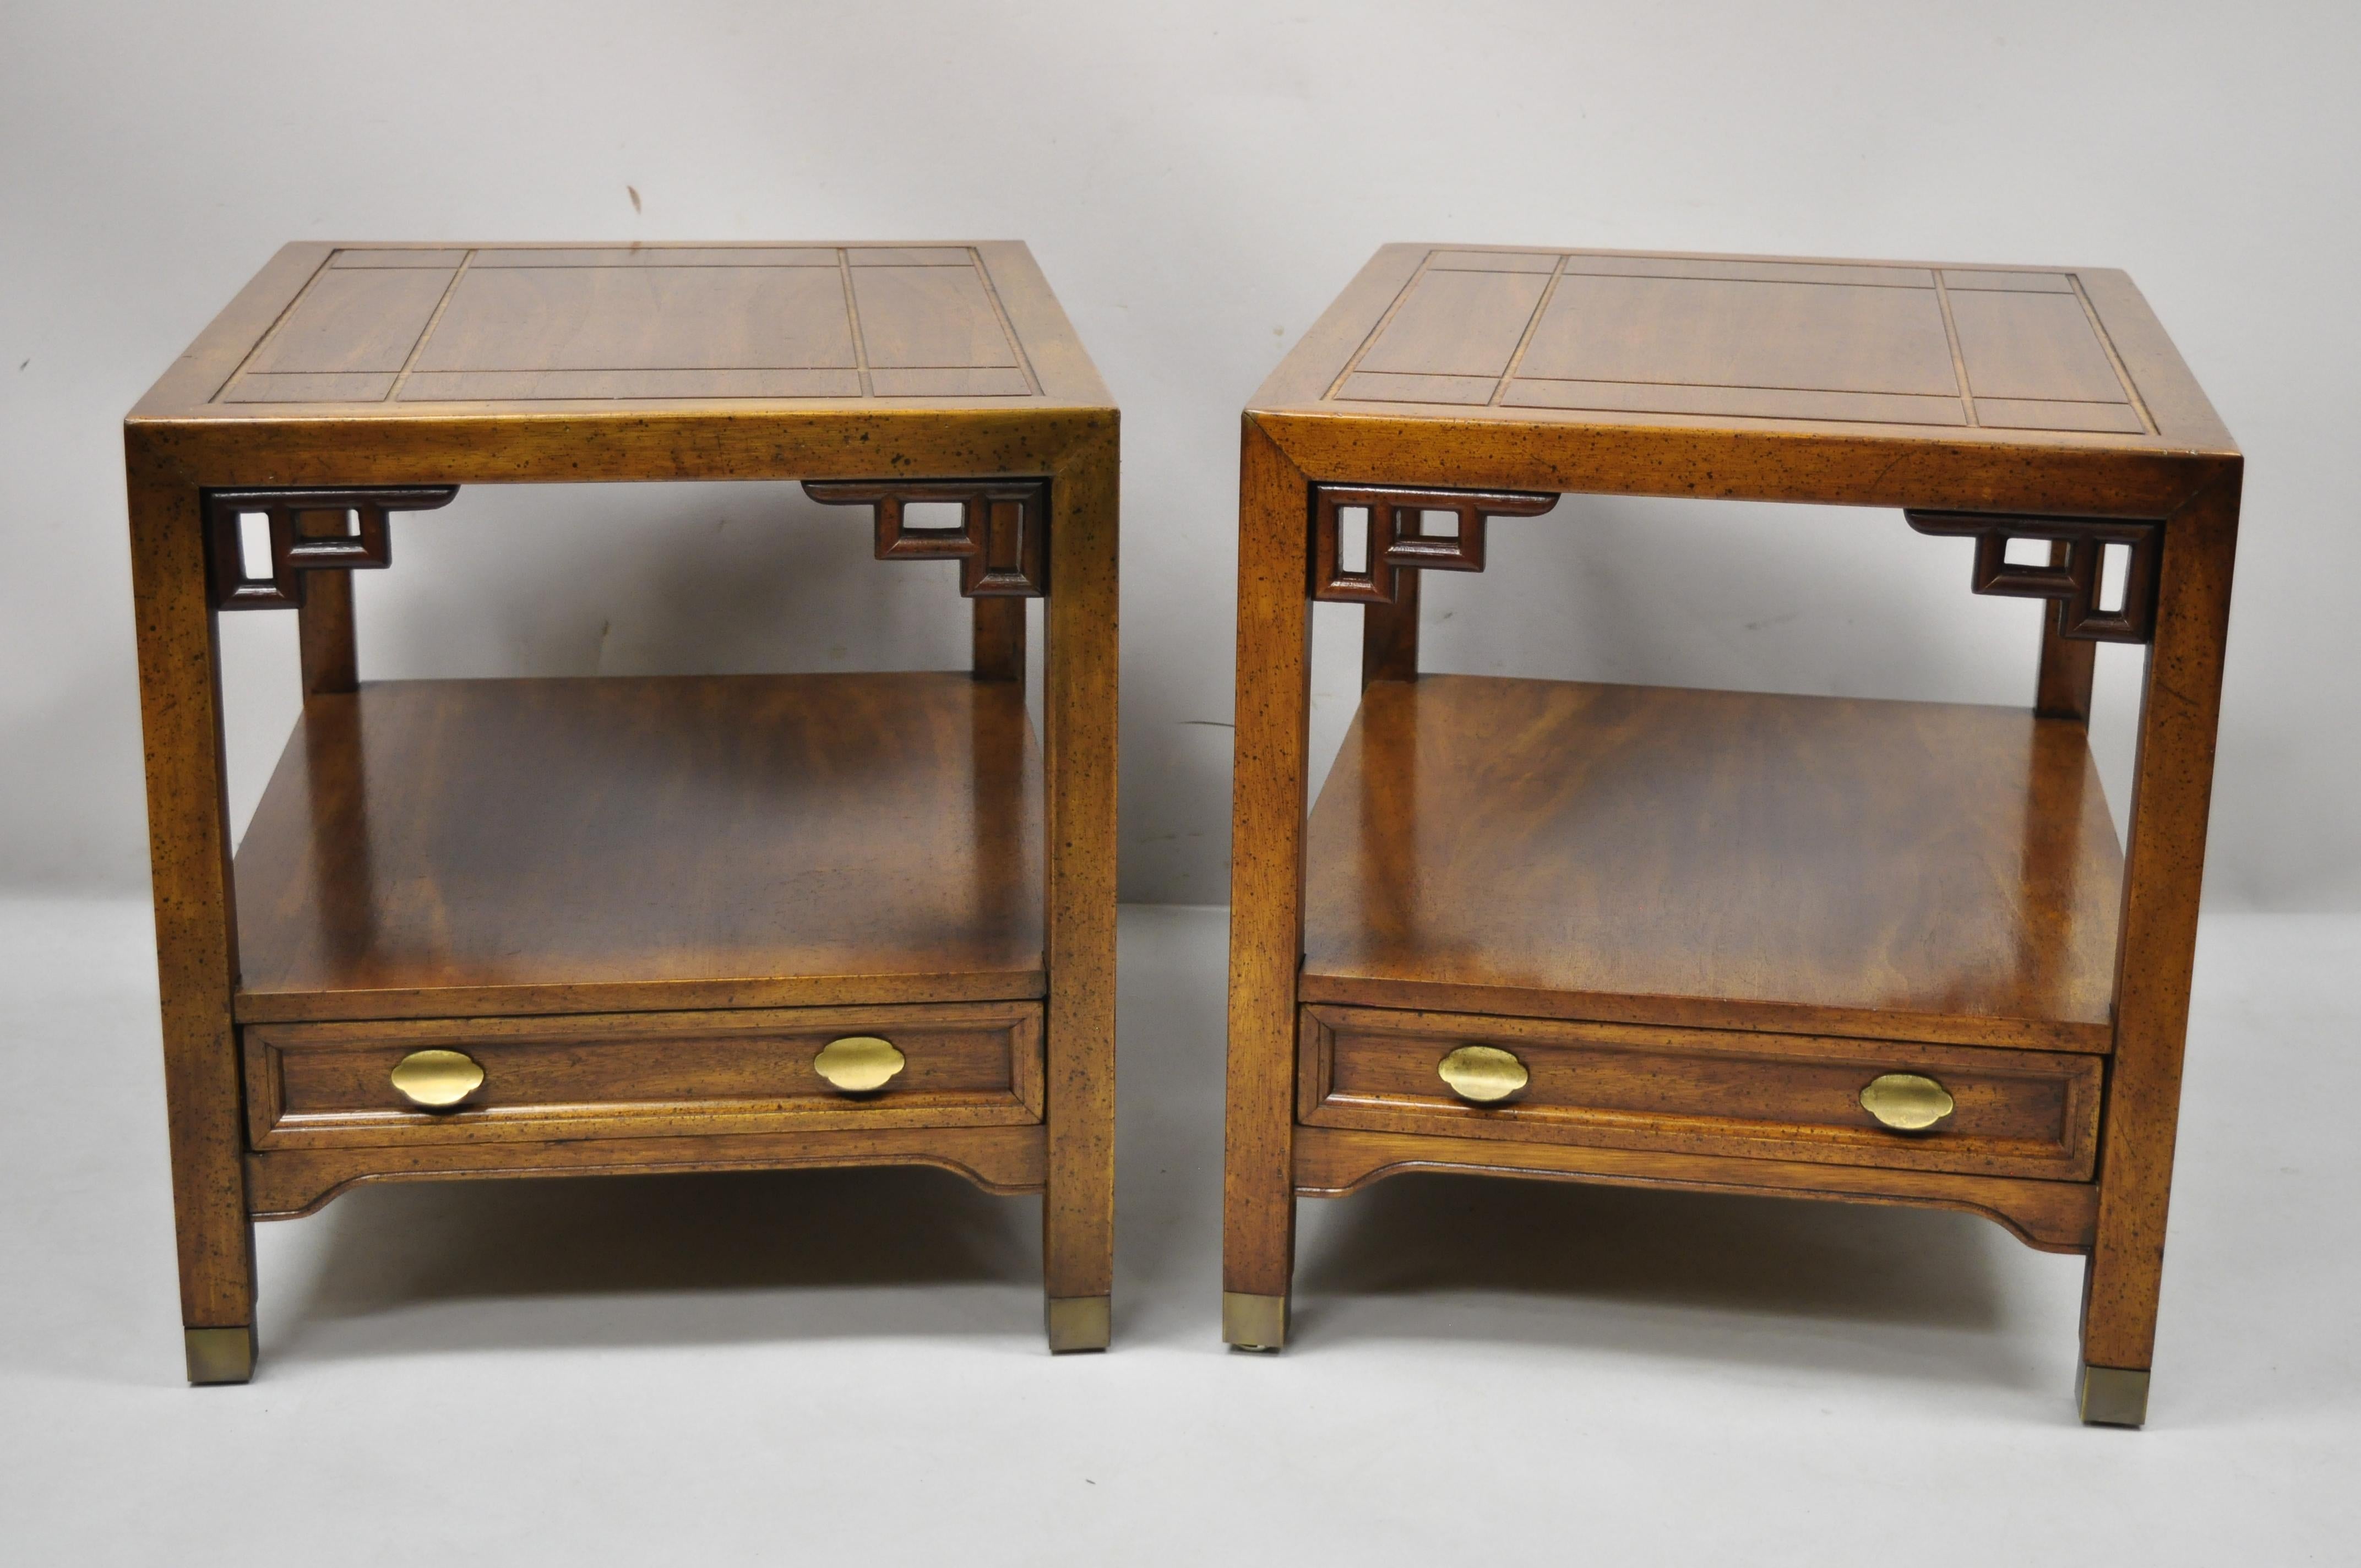 Century Furniture Chinoiserie fretwork wooden side lamp end tables - a pair. Item features carved fretwork corners, lower shelf, solid wood construction, distressed finish, nicely carved details, finished back, original stamp, 1 dovetailed drawer,